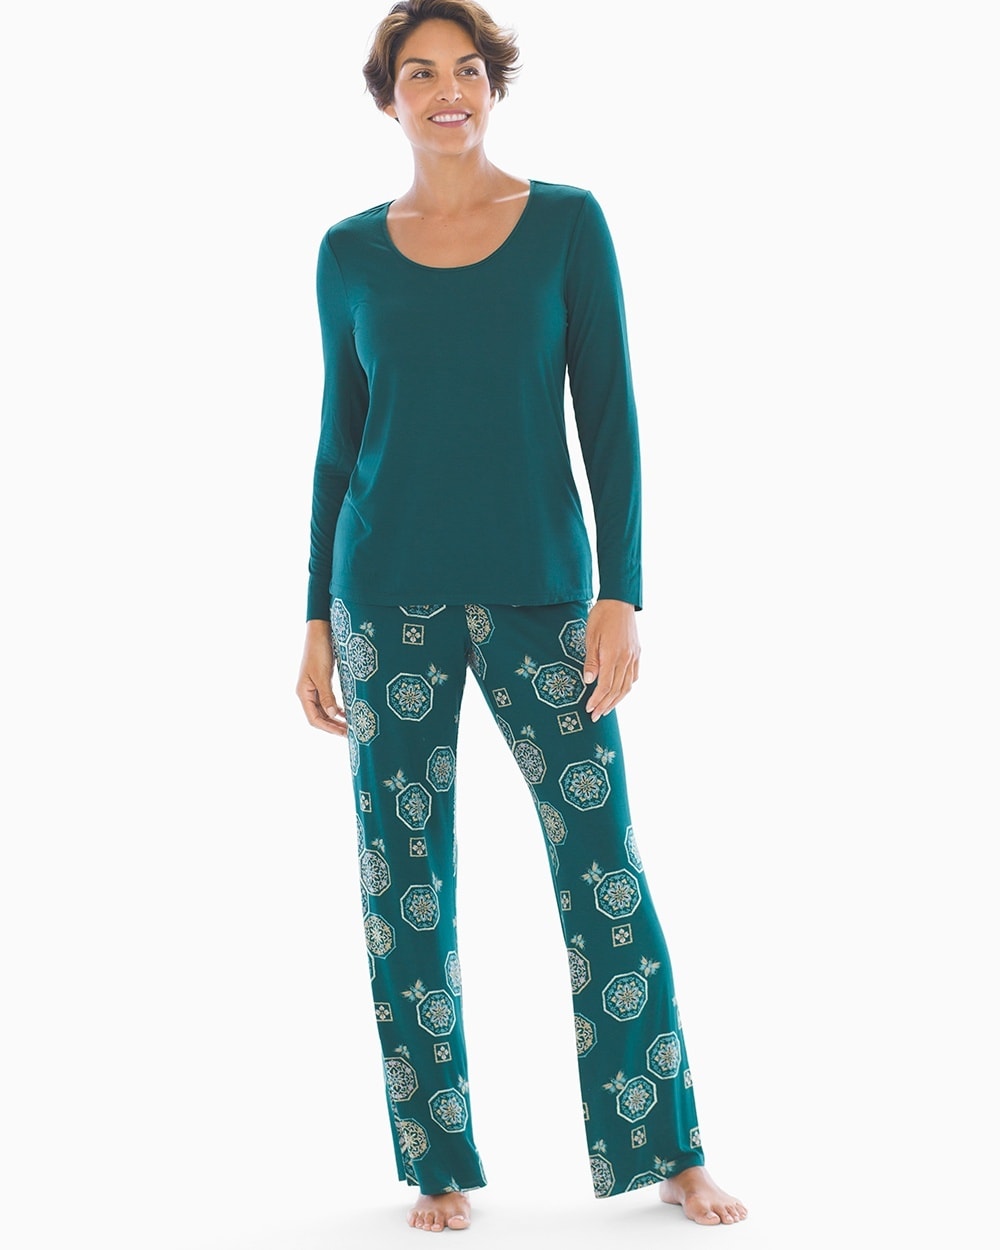 Cool Nights Long Sleeve Pajama Set Floral Tiles with Jasper Green